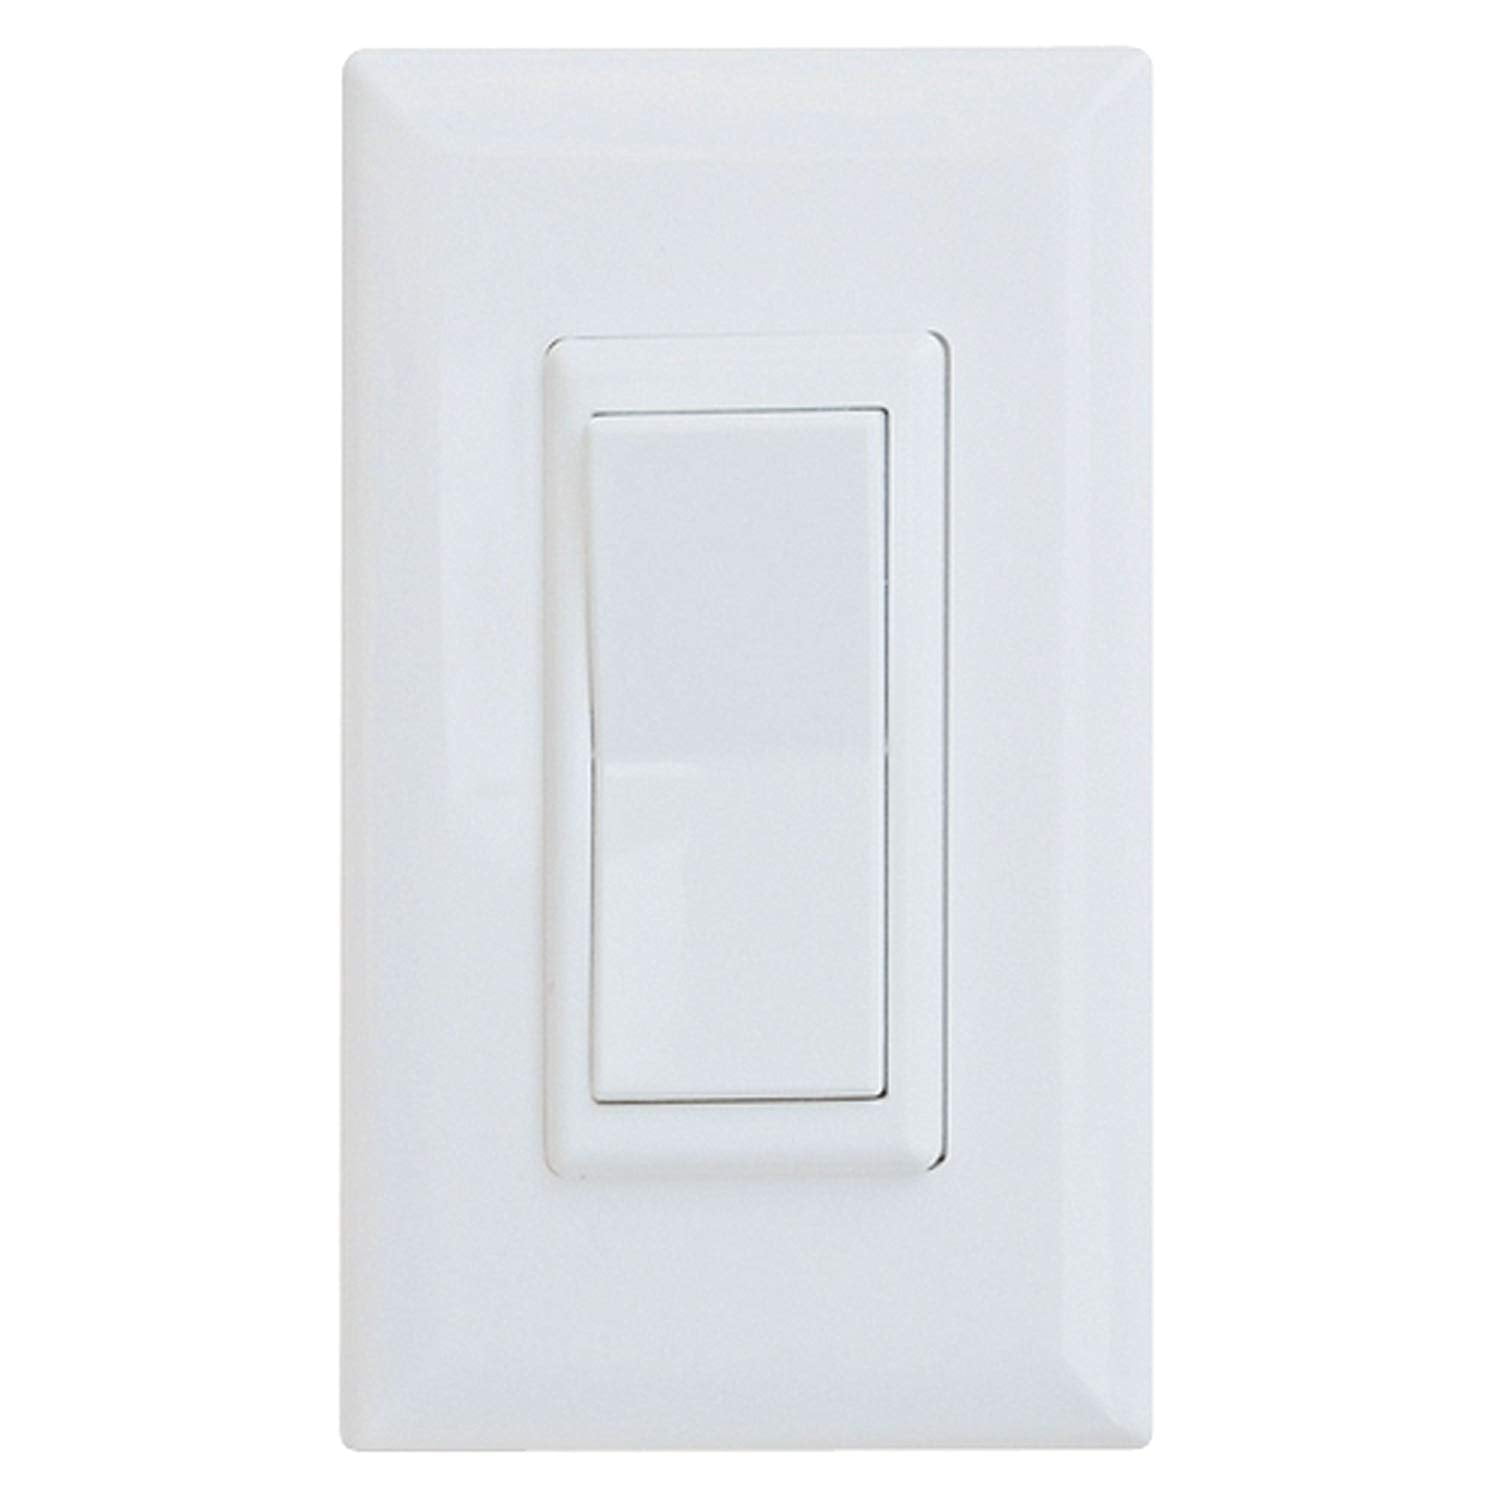 Mobile Home RV Parts Self Contained  Rocker Switch Includes Cover Plate White 